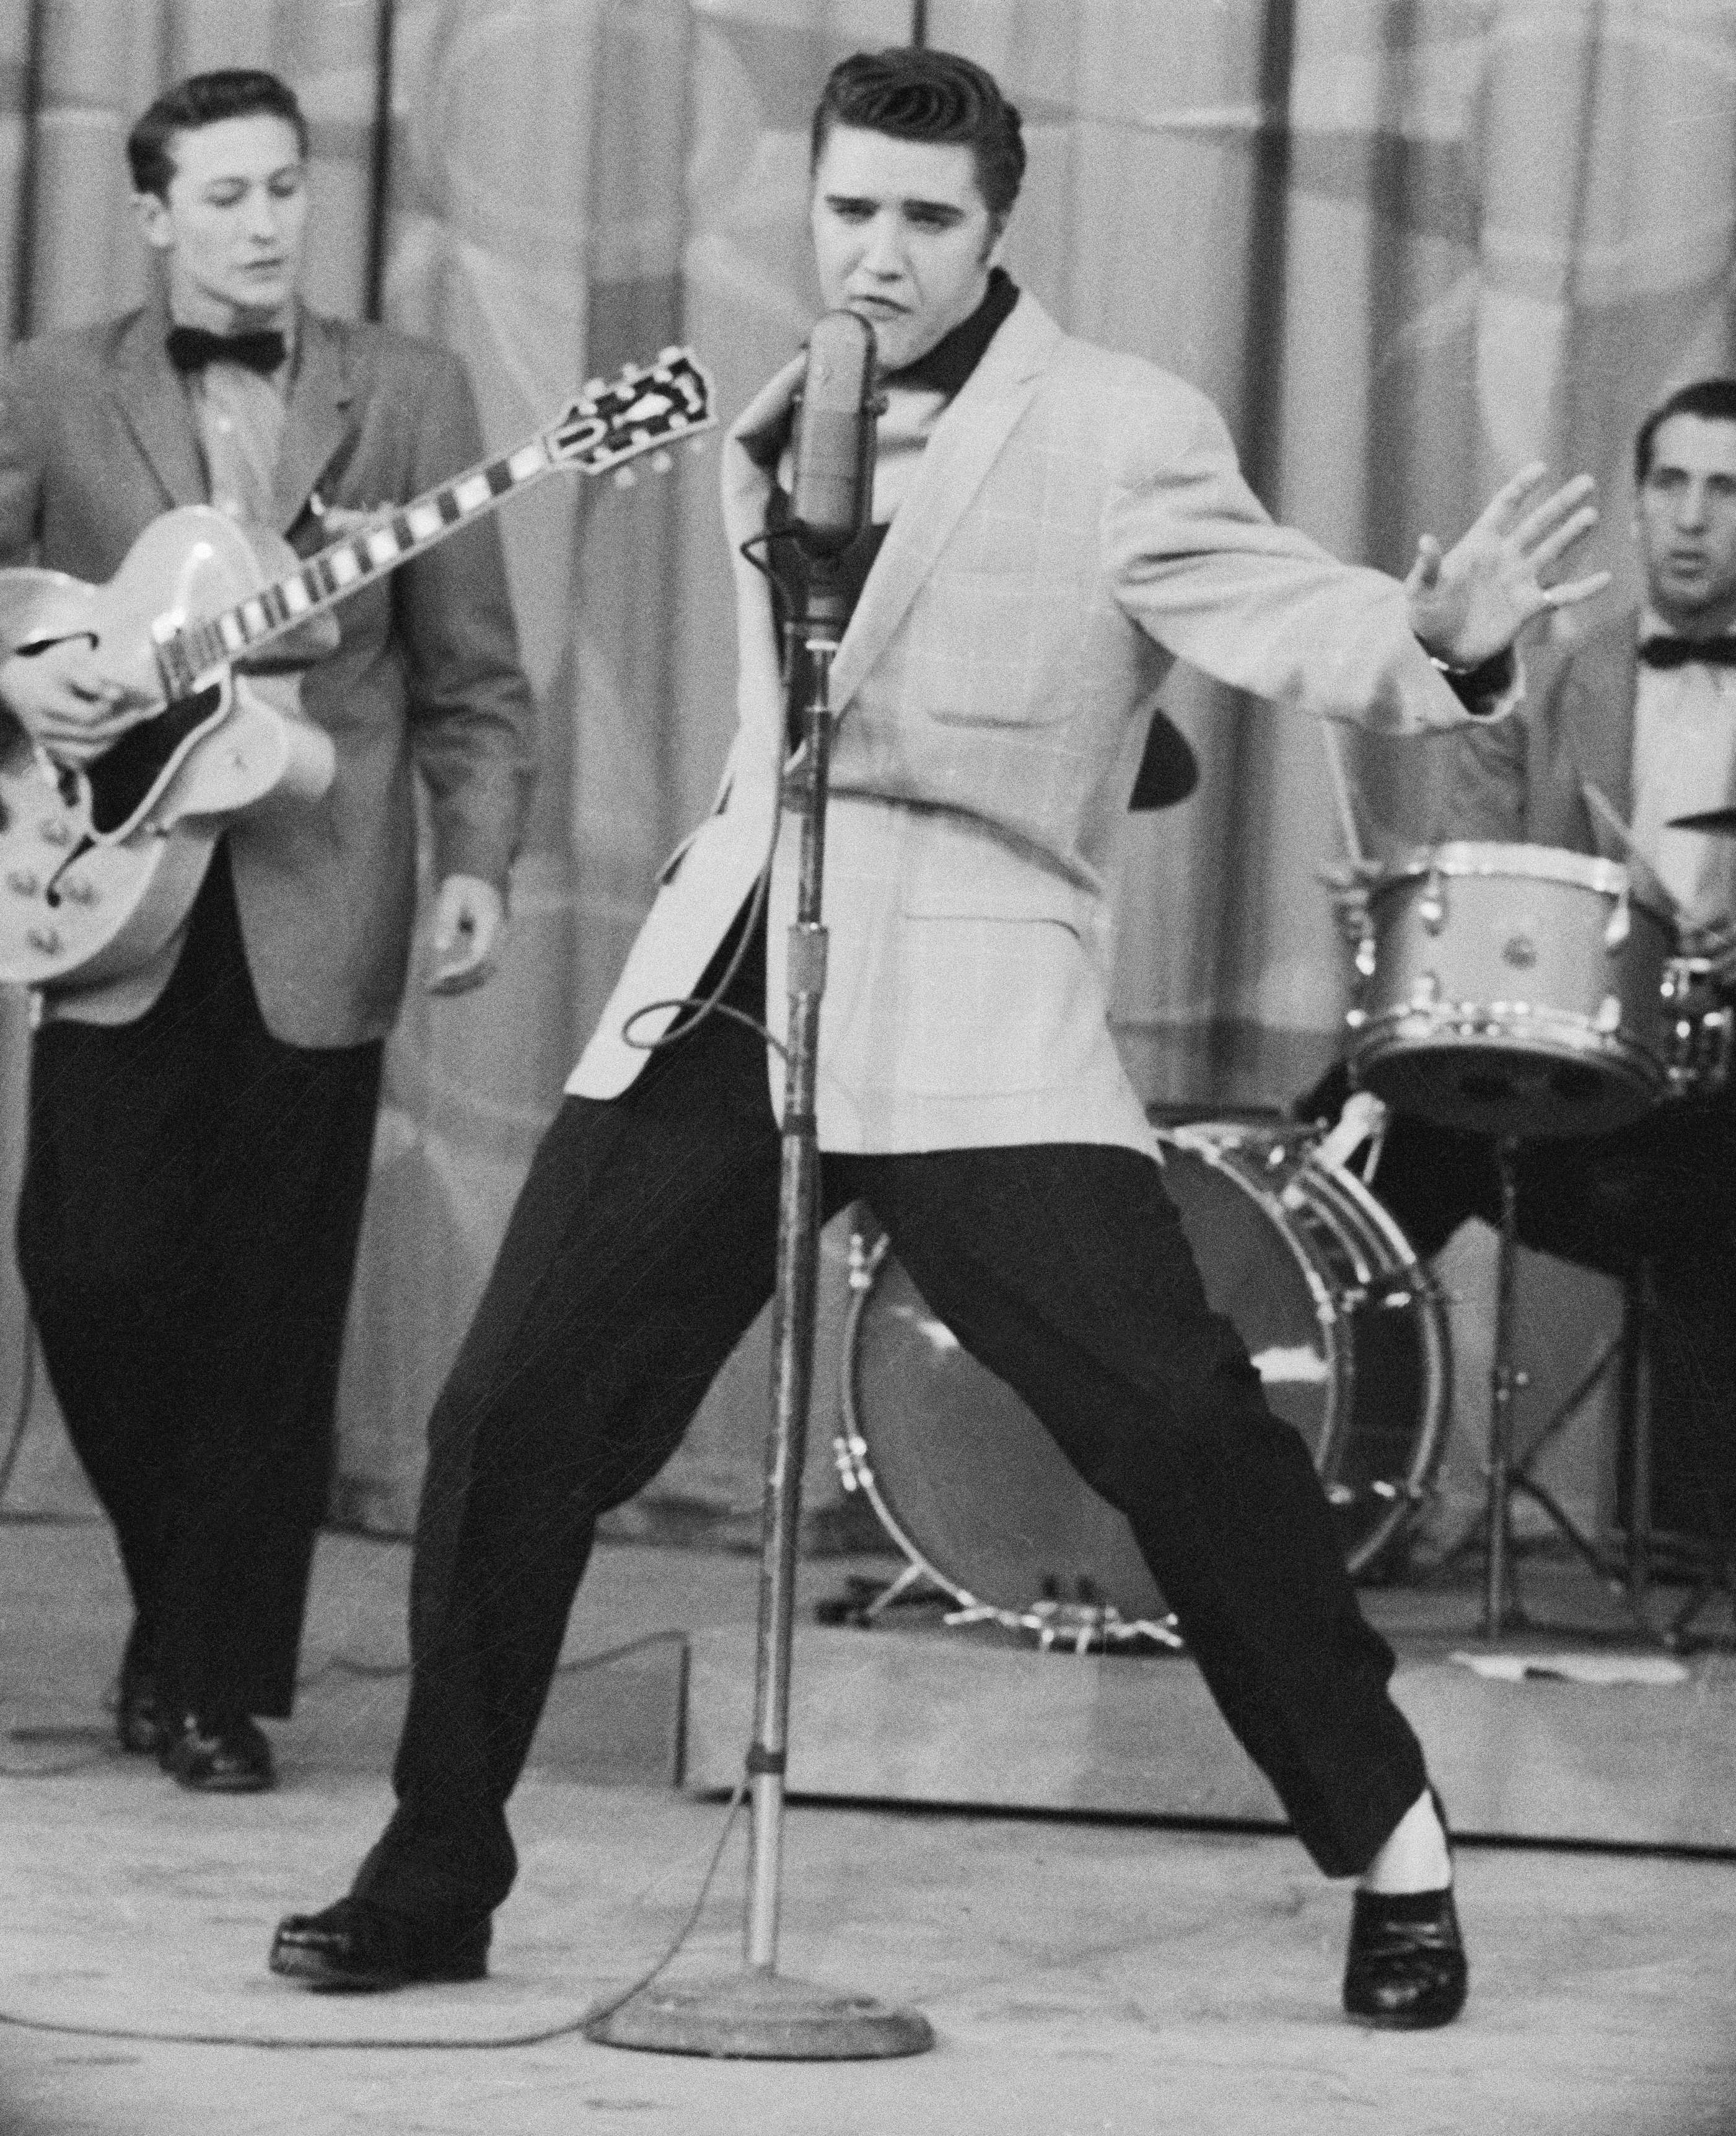 Elvis Presley performs on stage on June 22, 1956 | Source: Getty Images